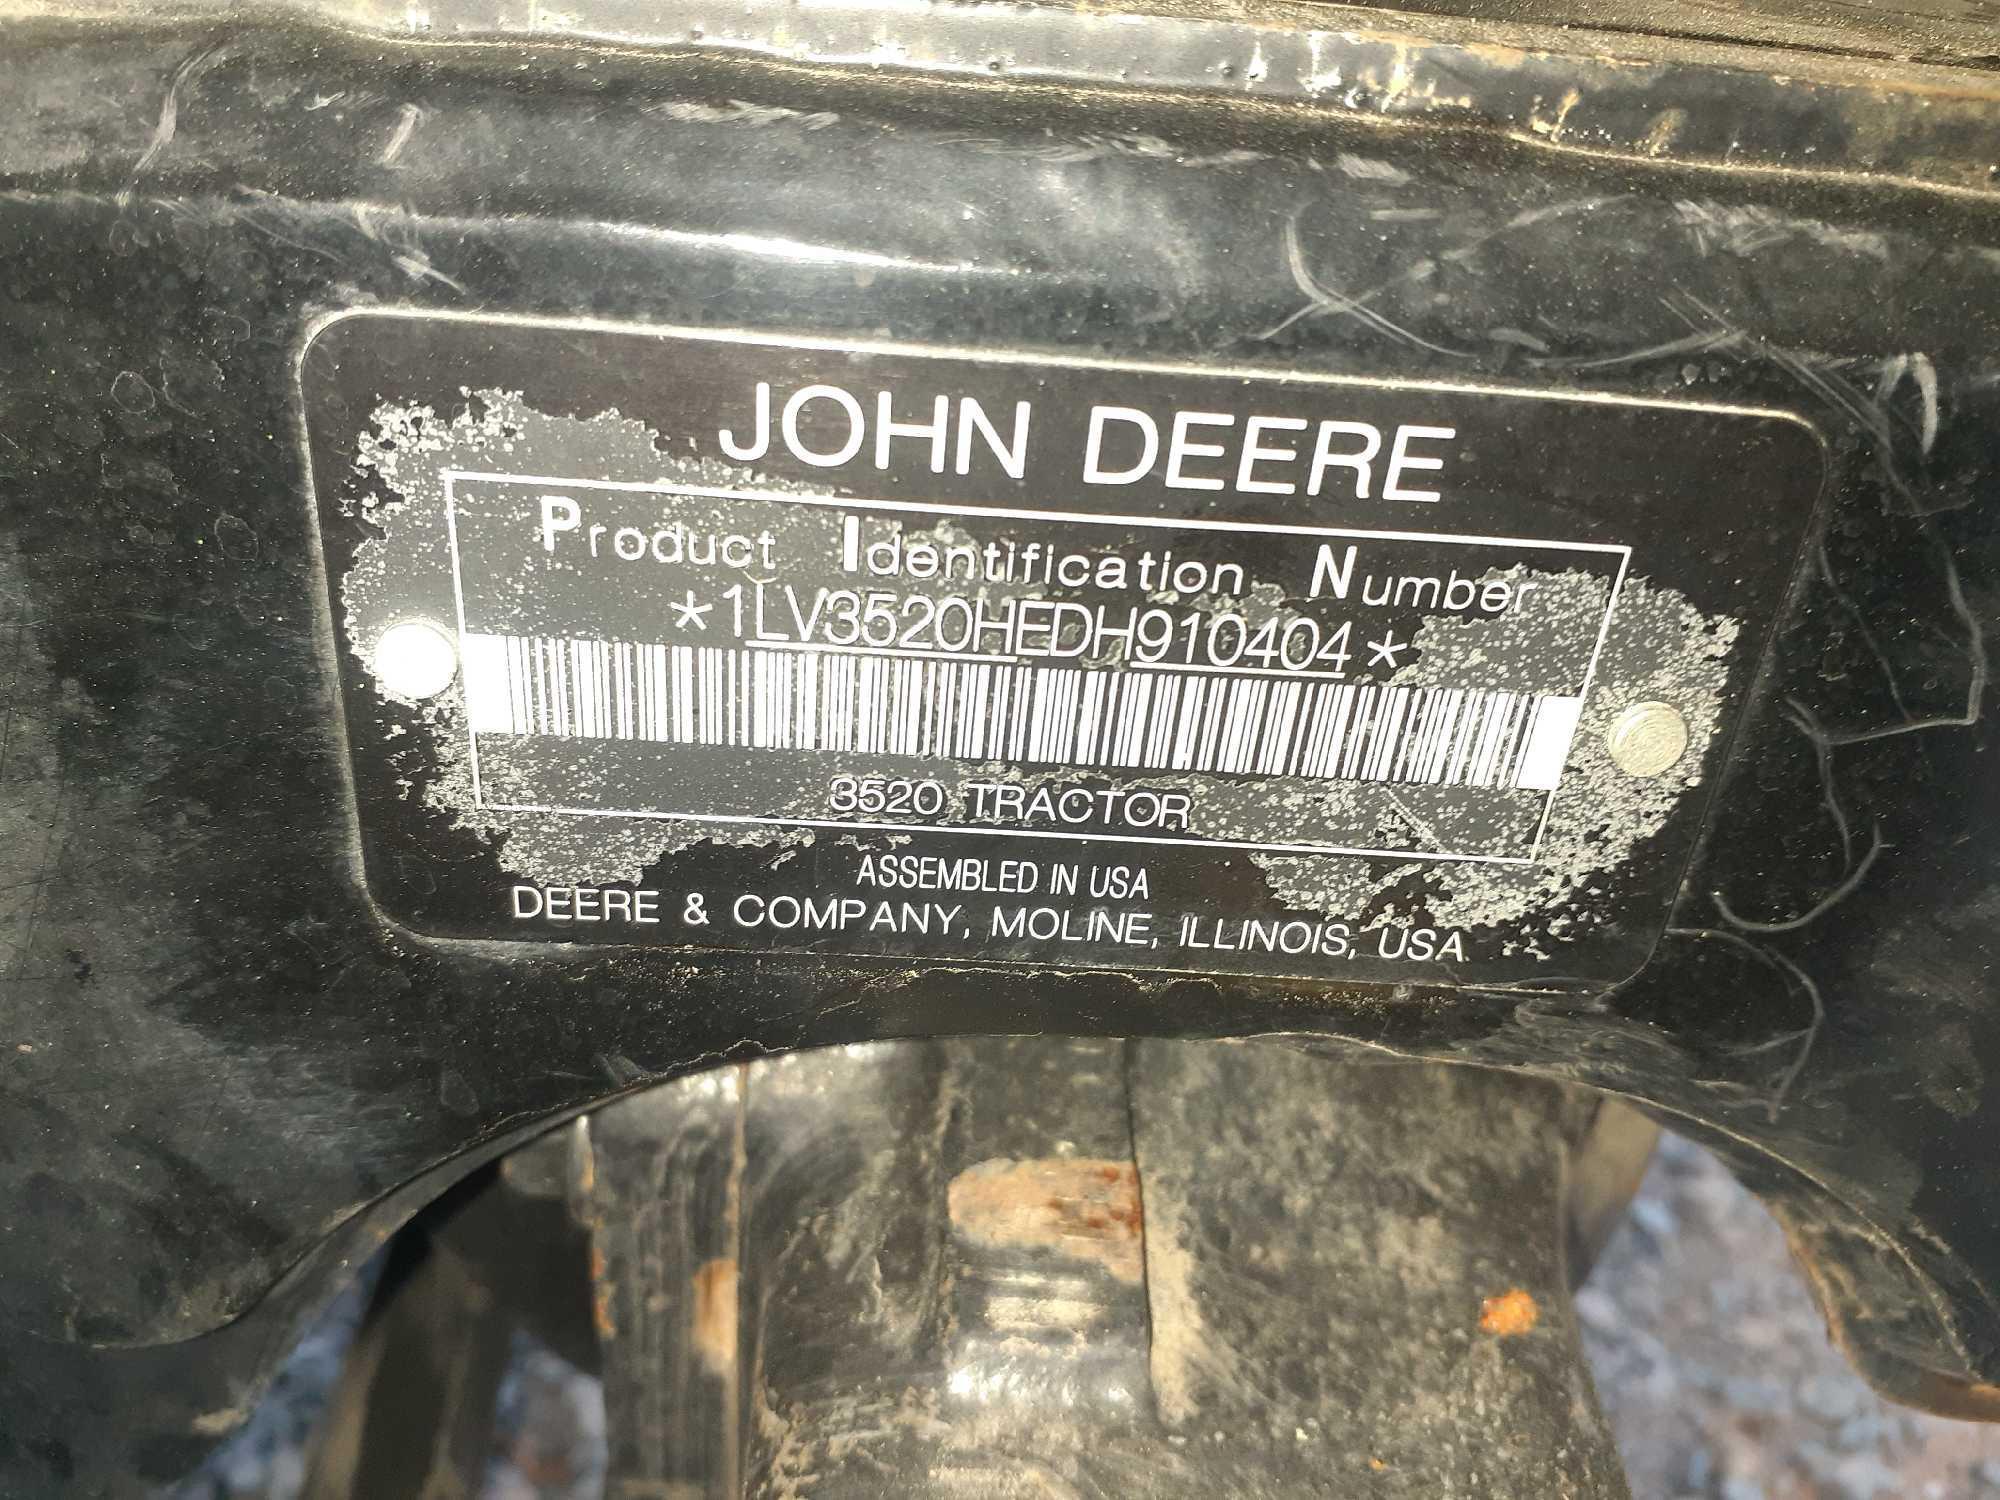 2013 John Deere 3520 with 300cx loader only 220 hours